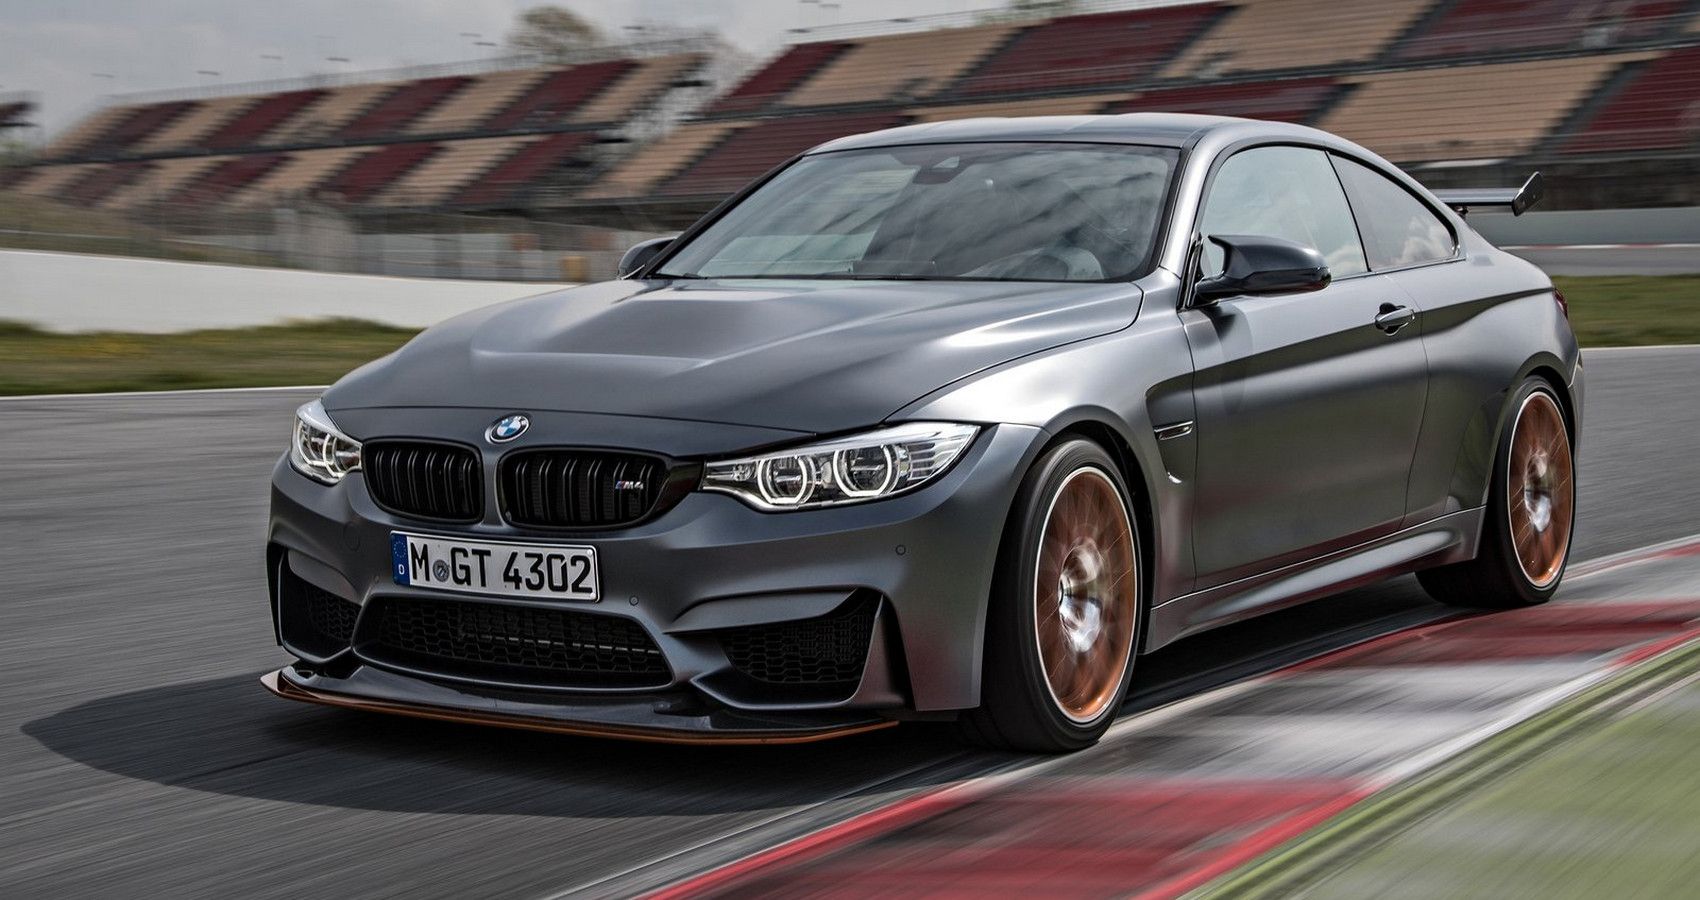 2014 BMW M4 GTS silver on the track